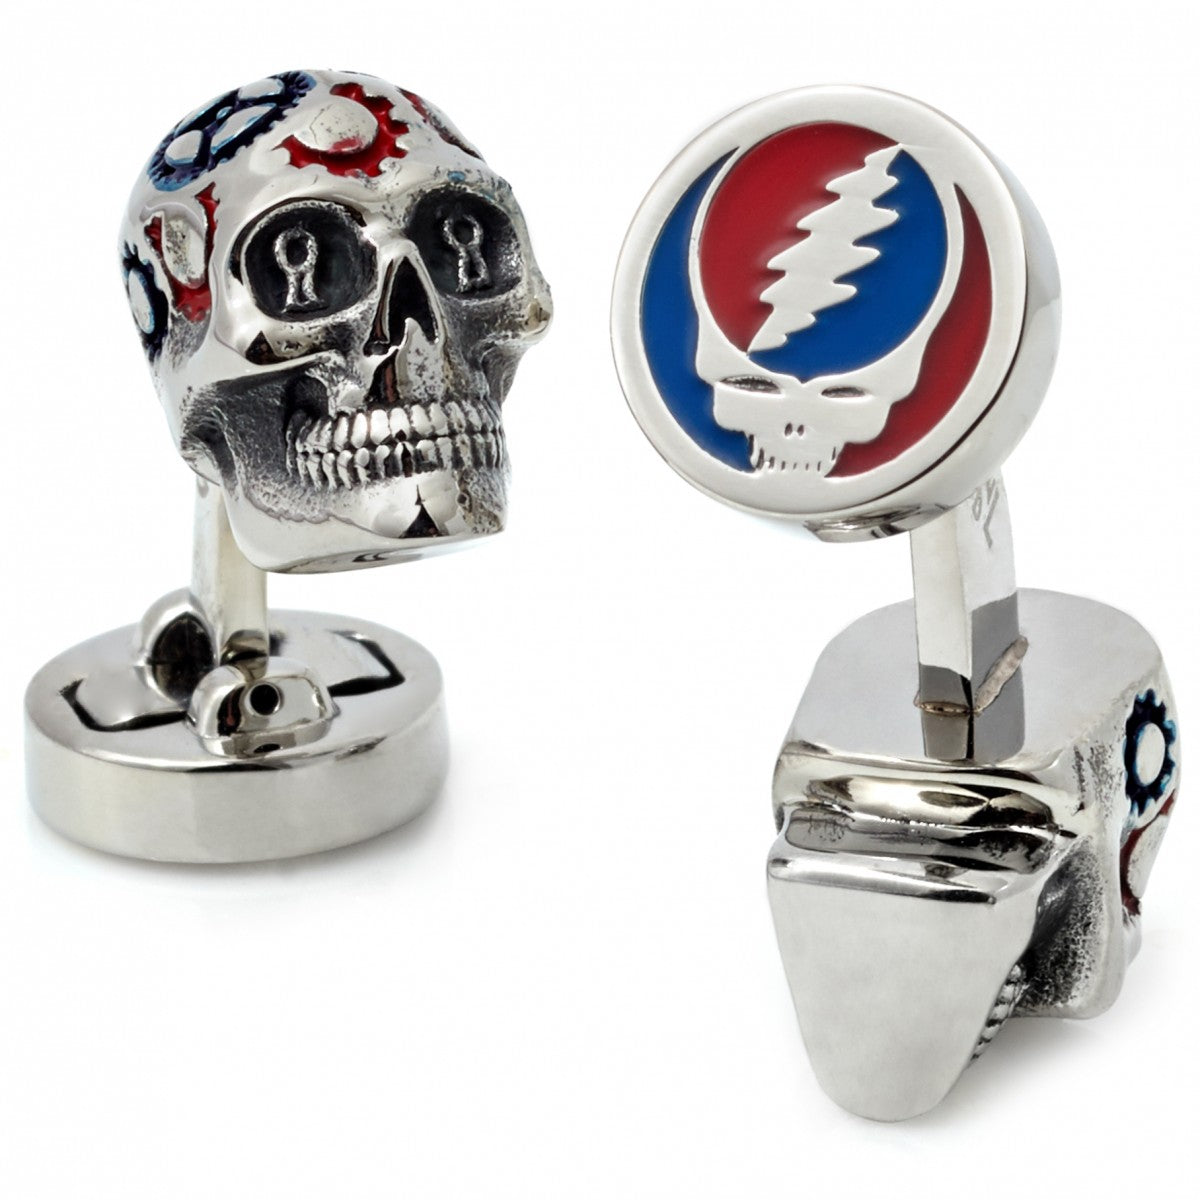 Tateossian Grateful Dead Skull with Gears Painted Cufflinks, Rhodium Plated Silver